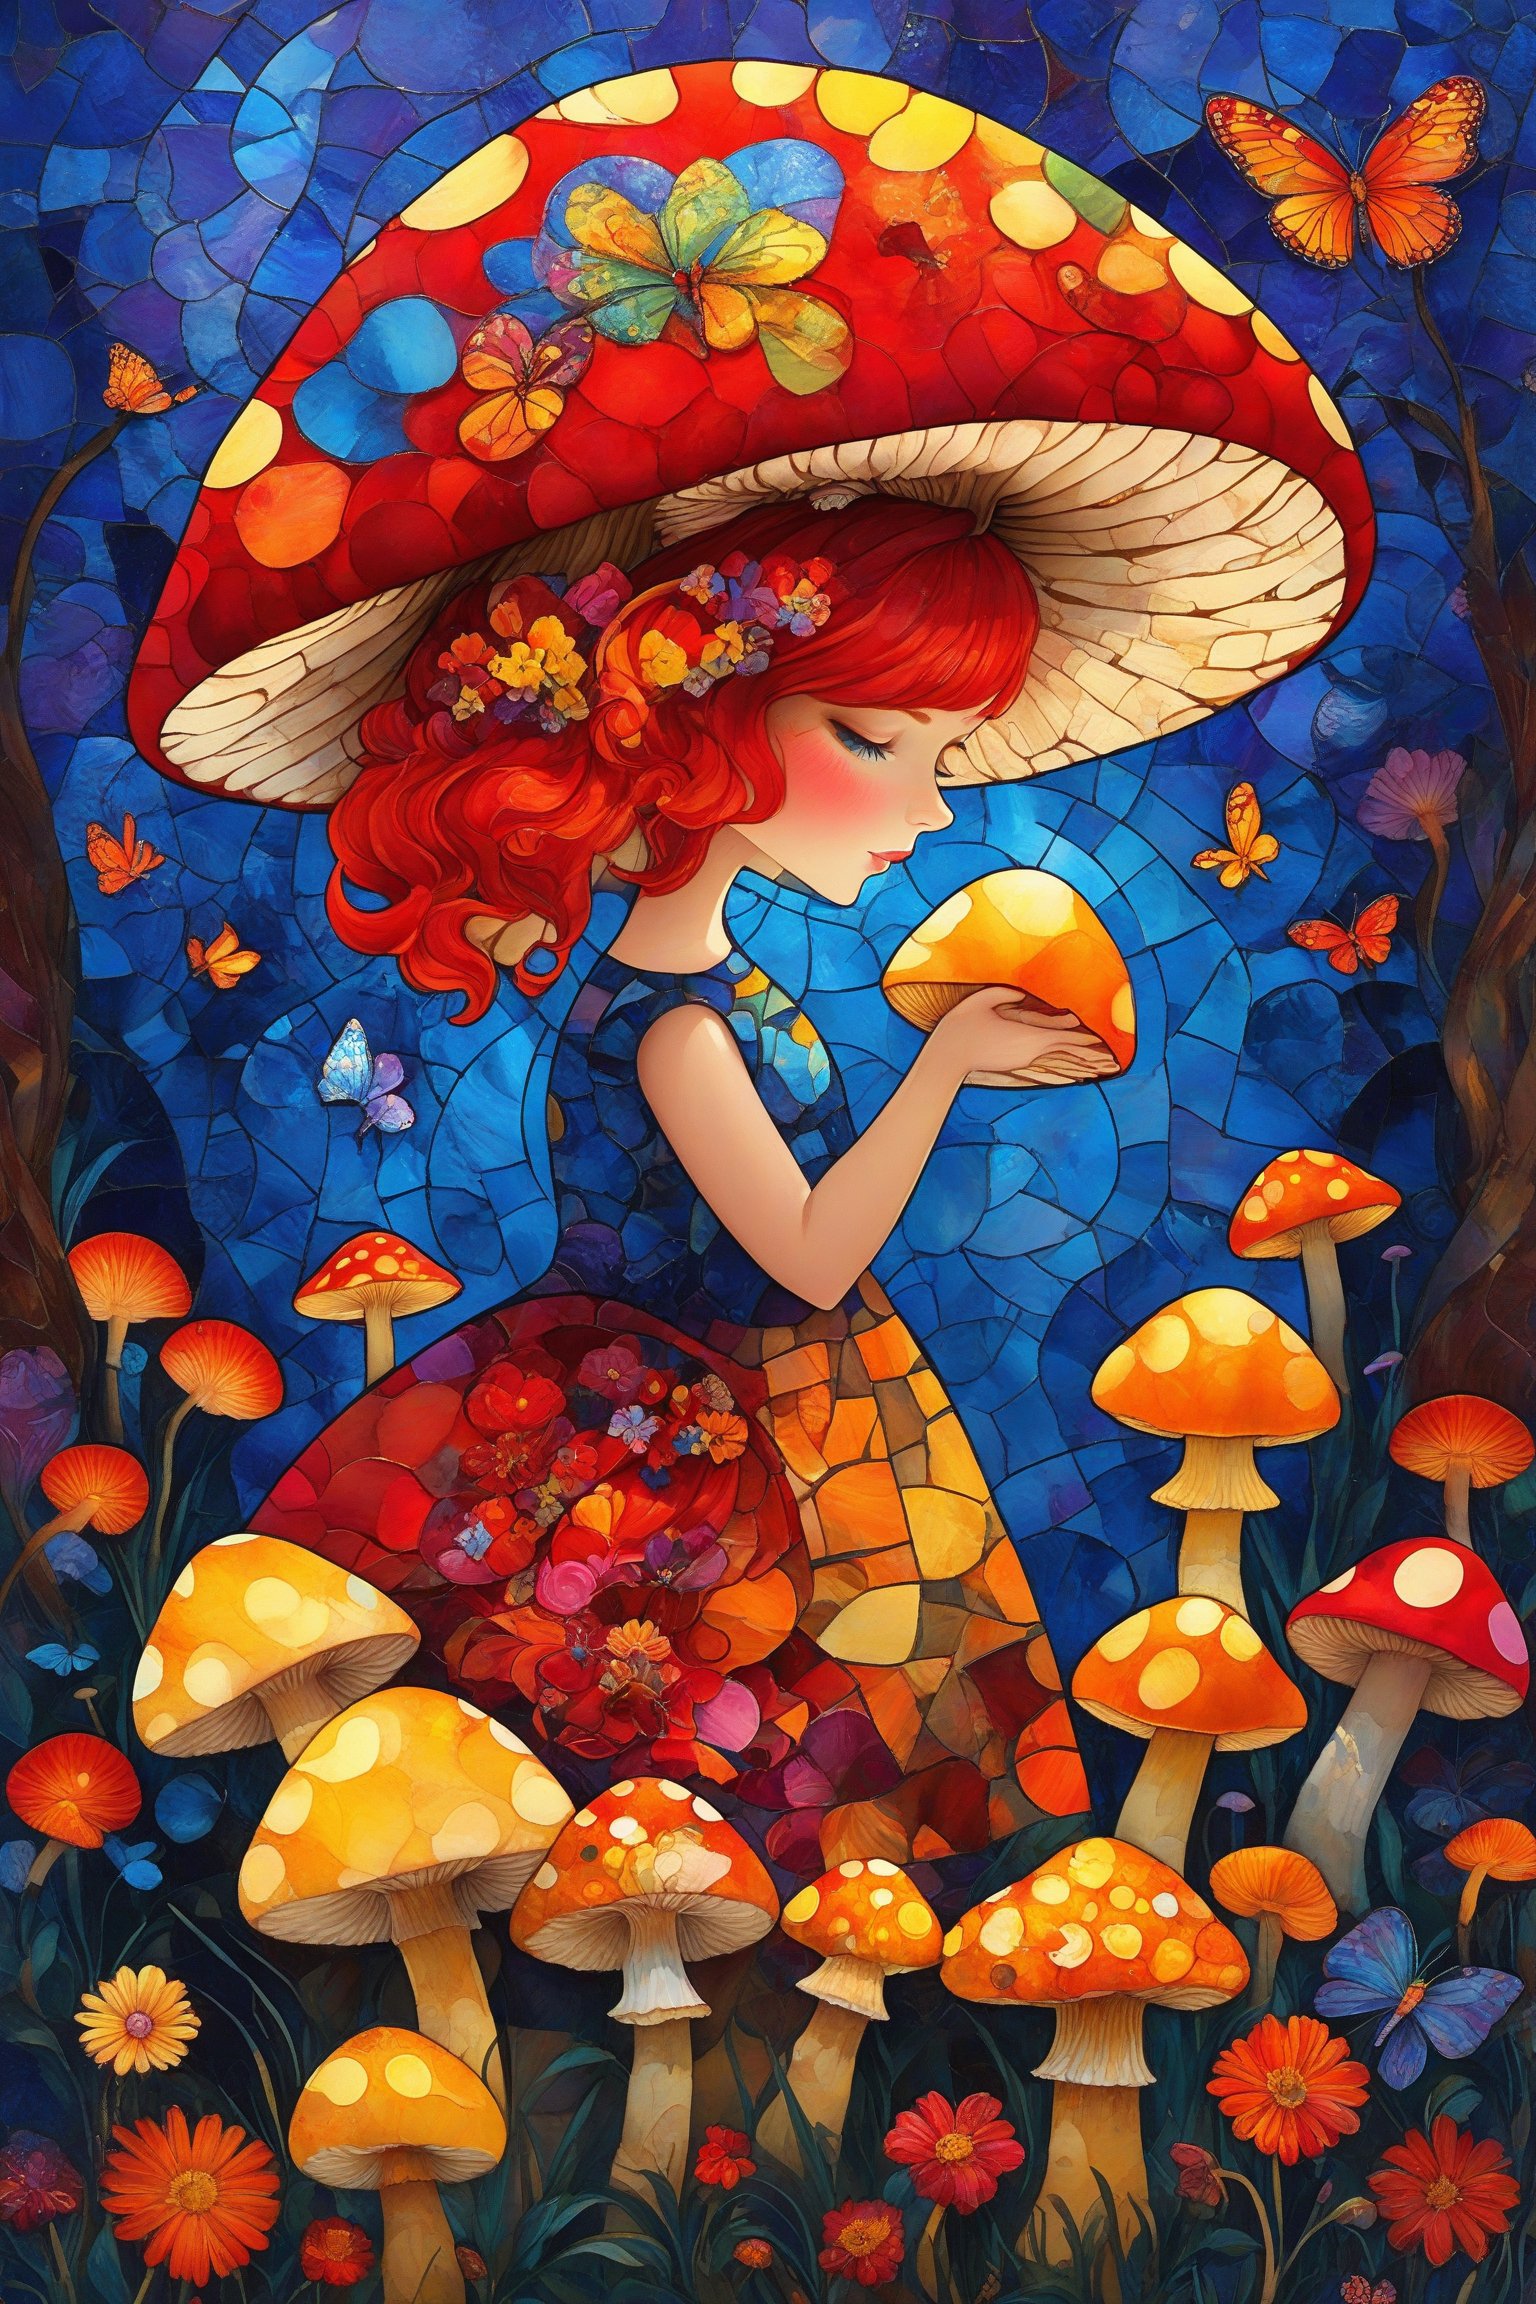 A vibrant and colorful artwork. At the center, there's a girl with red hair, wearing a patchwork dress, gently caressing a large mushroom. The mushroom has a vivid red cap with circular patterns and a golden stem. Surrounding the girl and mushroom are various other mushrooms, flowers, and butterflies. The background is a mosaic of blue tones, with abstract patterns and swirls, giving the entire scene a dreamy and magical ambiance.